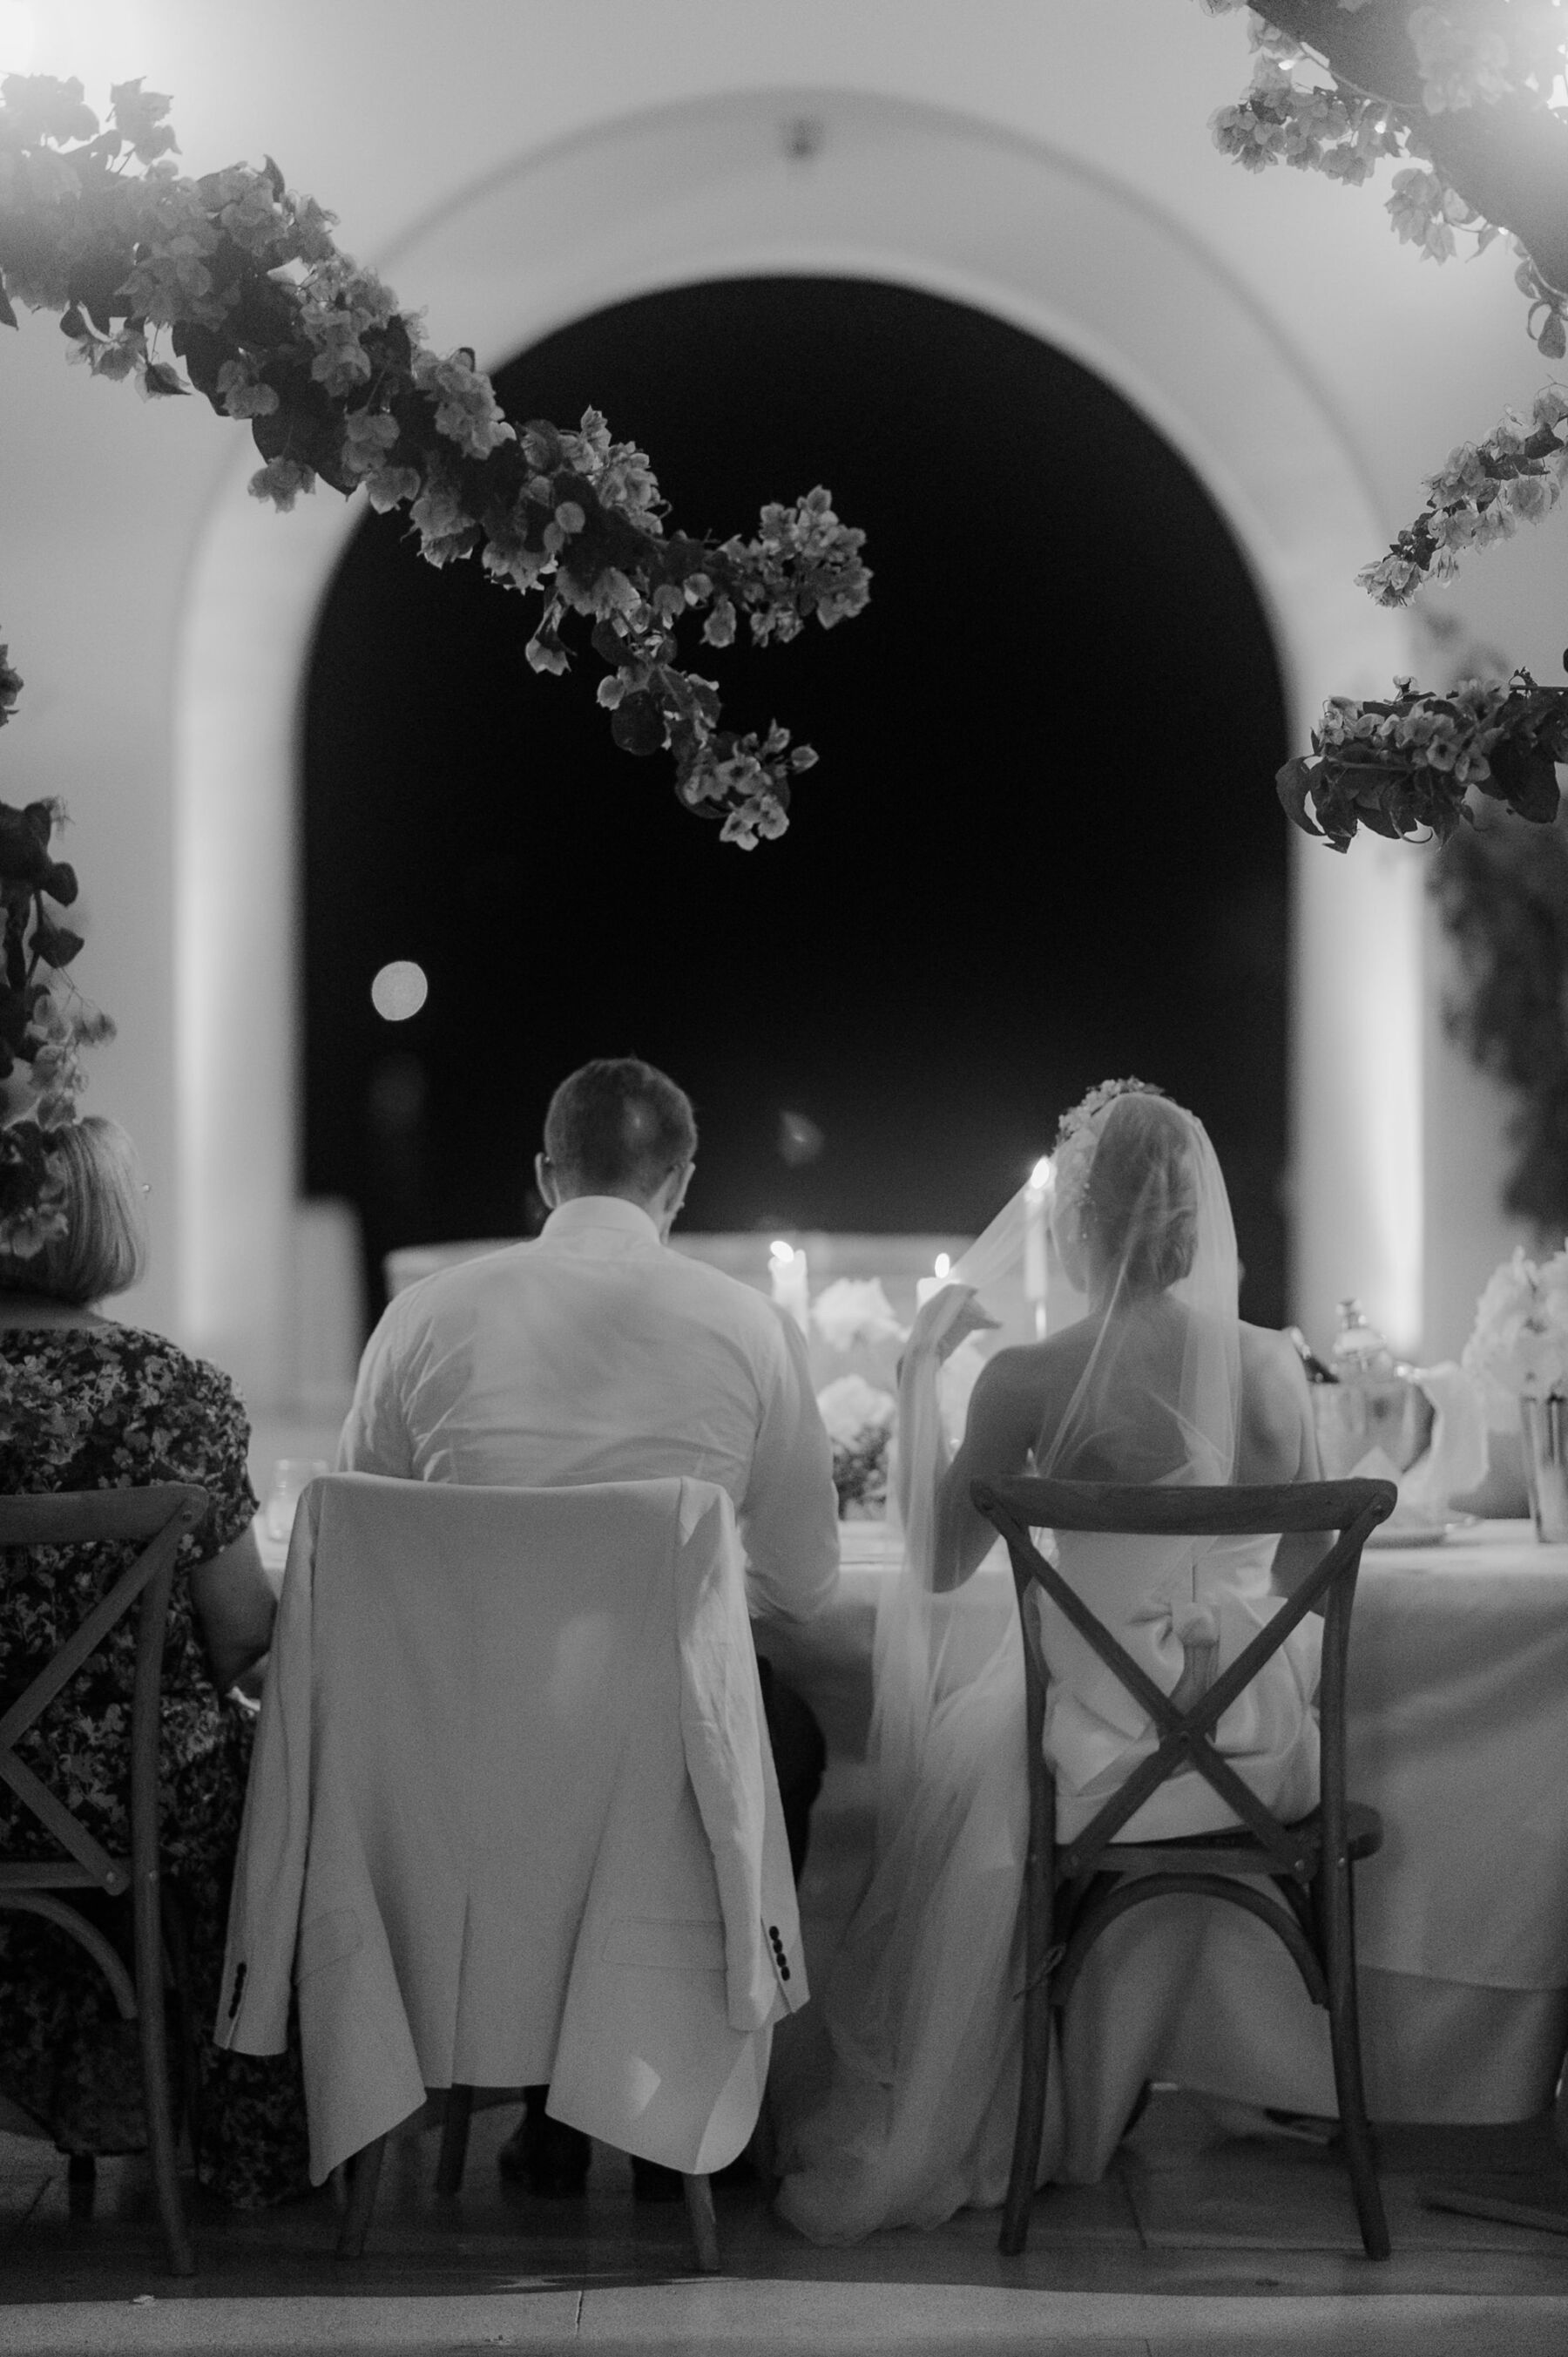 Shot from behind of bride and groom sitting next to one another on cross back wooden chairs with an archway head of them at night time.